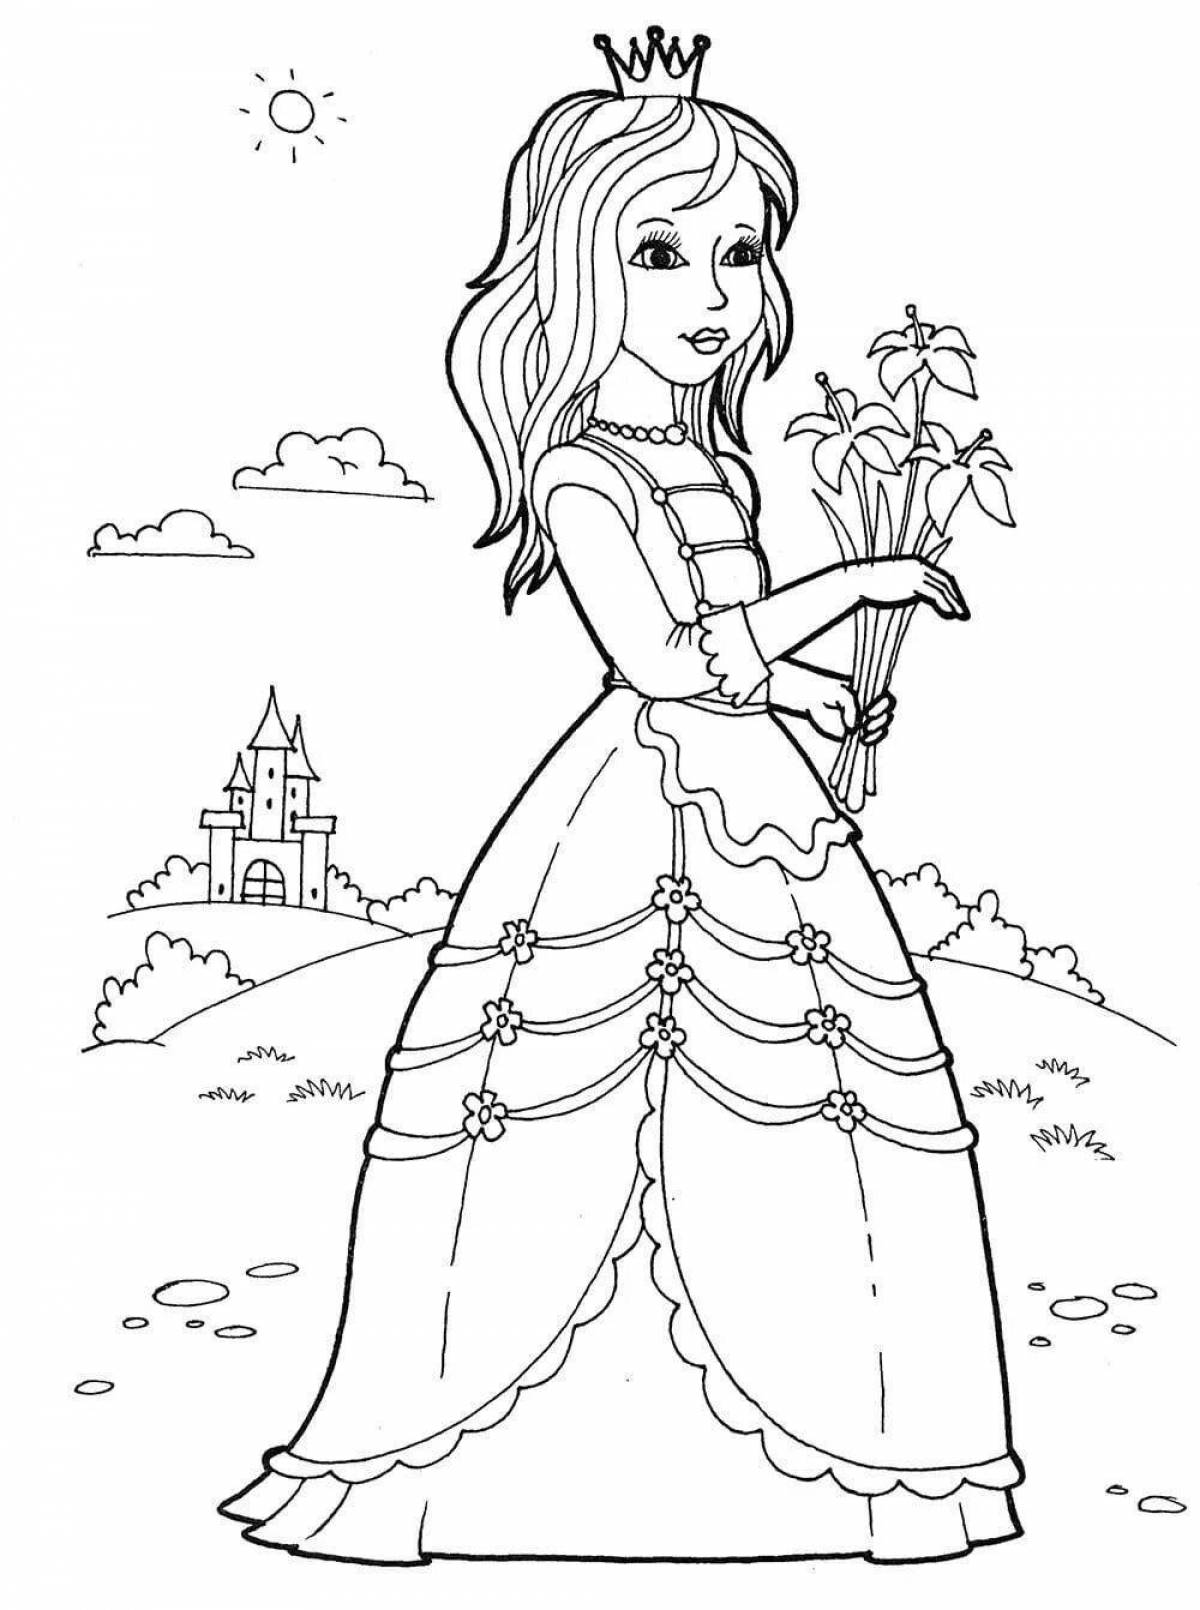 Inspirational coloring book for girls 6-7 years old